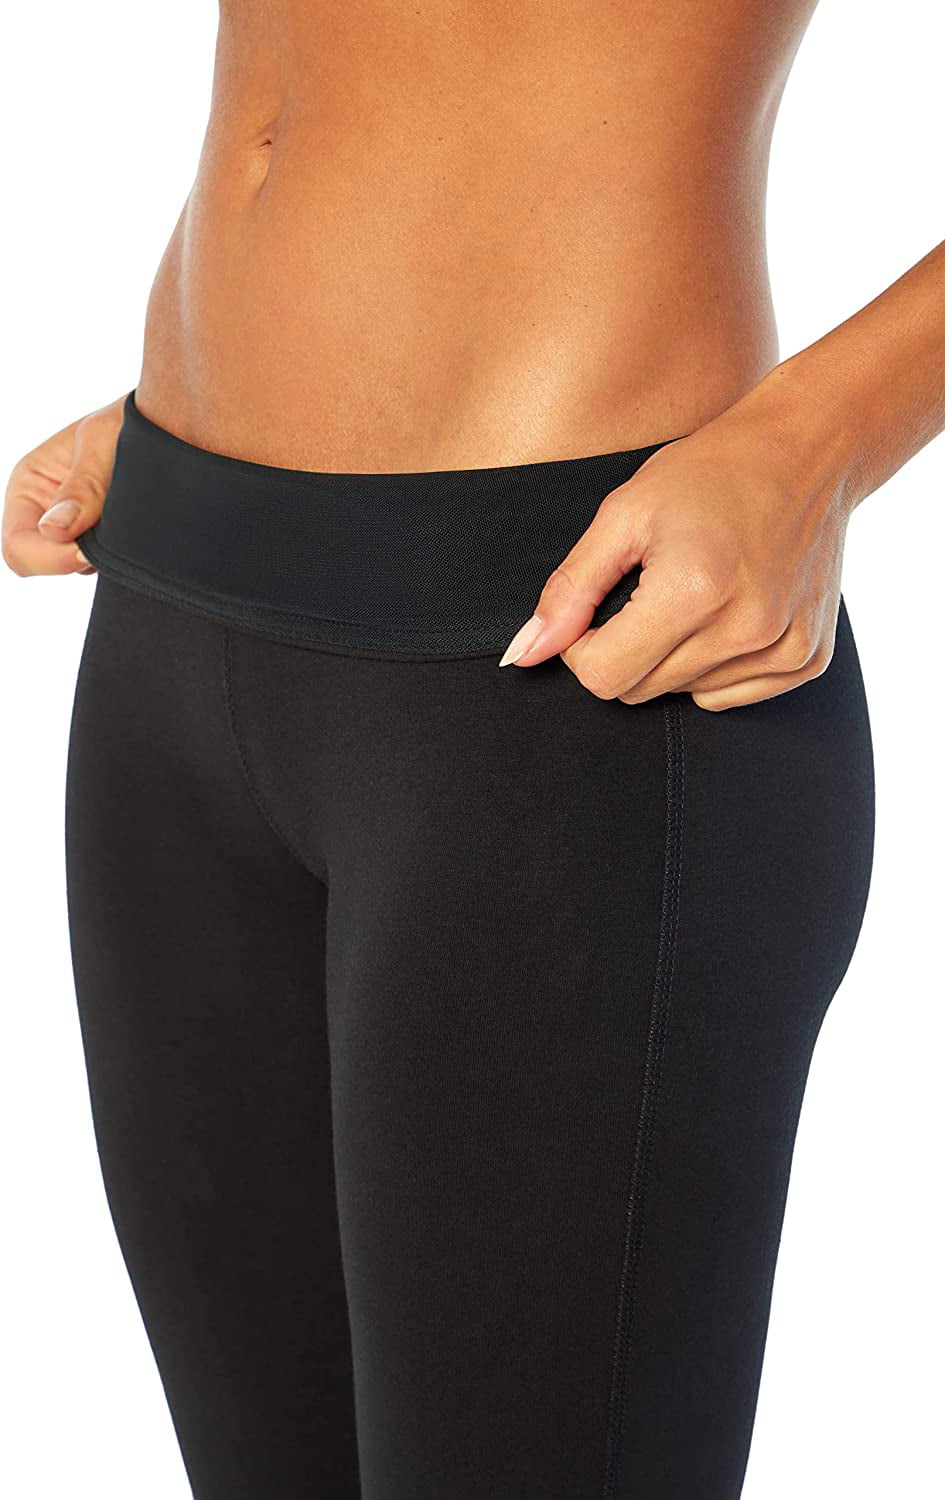 Bally Total Fitness Womens Tummy Control Long Pant 29 Inseam X-Large Short  Black 